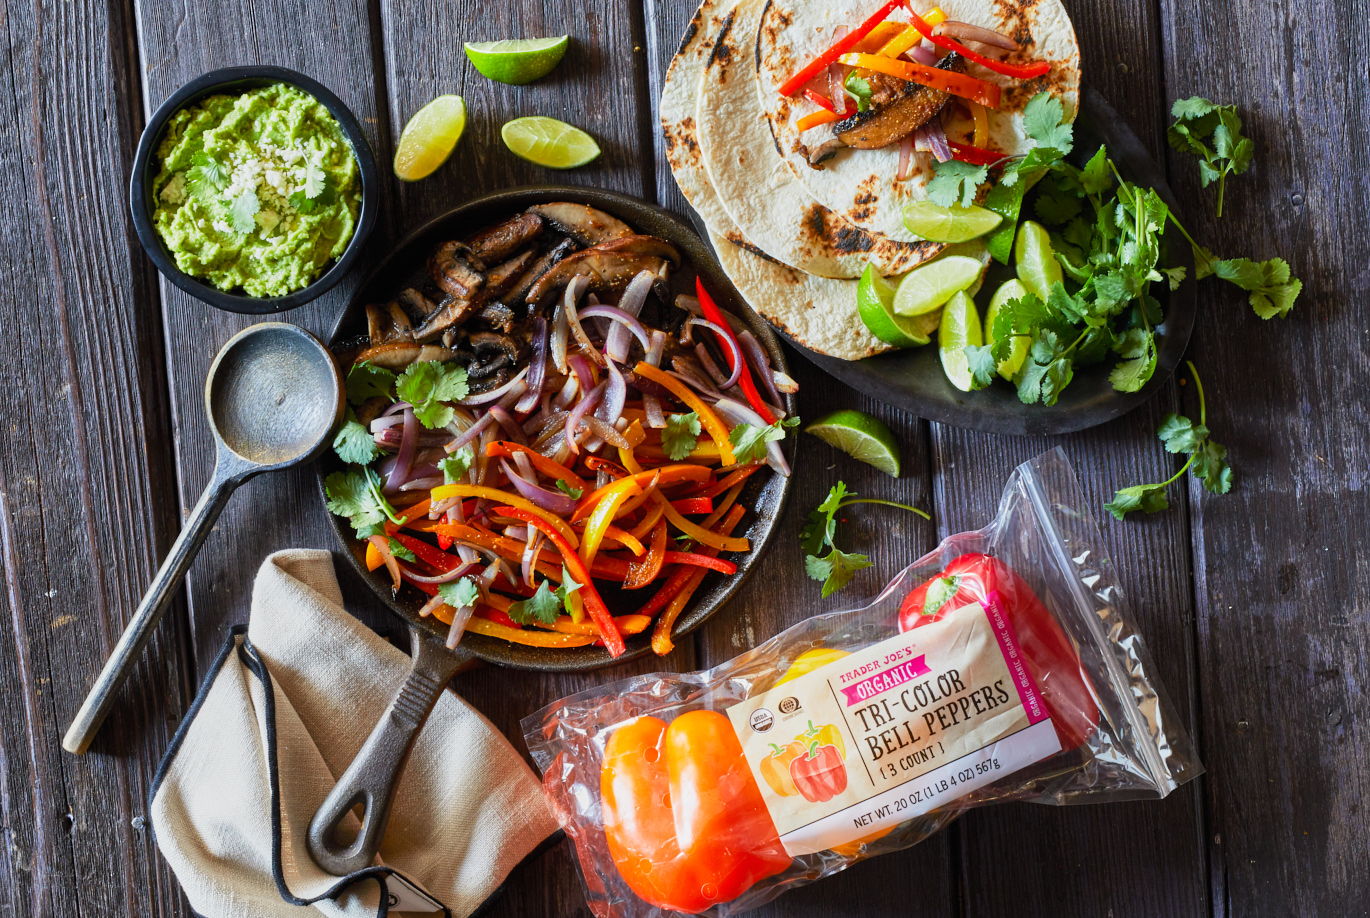 Trader Joe's Organic Tri-Color Bell Peppers; used in recipe for veggie fajitas; shown in fajita pan, with side of flour tortillas and small dish of guacamole